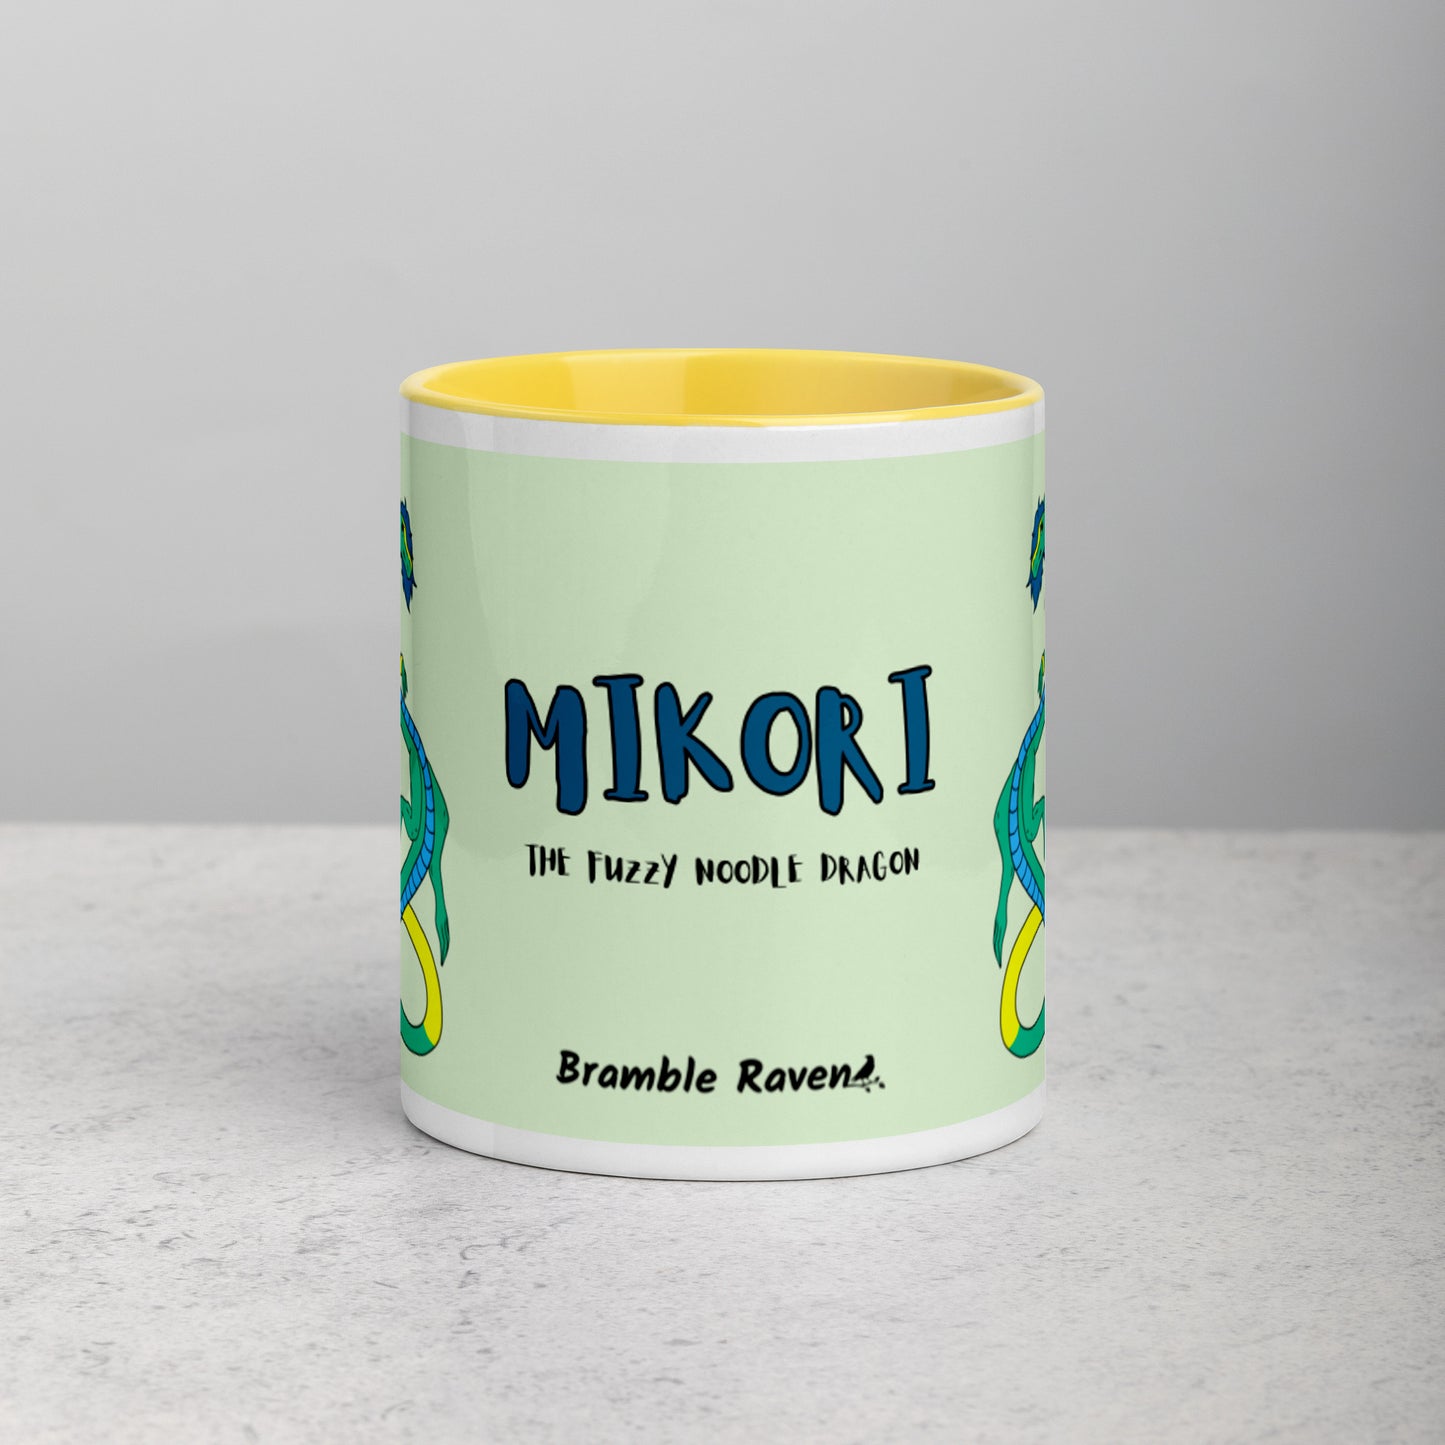 11 ounce white ceramic mug. Yellow inside and handle. Features double-sided image of Mikori the Fuzzy Noodle Dragon. Shown on tabletop. Front view shows Mikori the Fuzzy Noodle Dragon text and Bramble Raven logo.